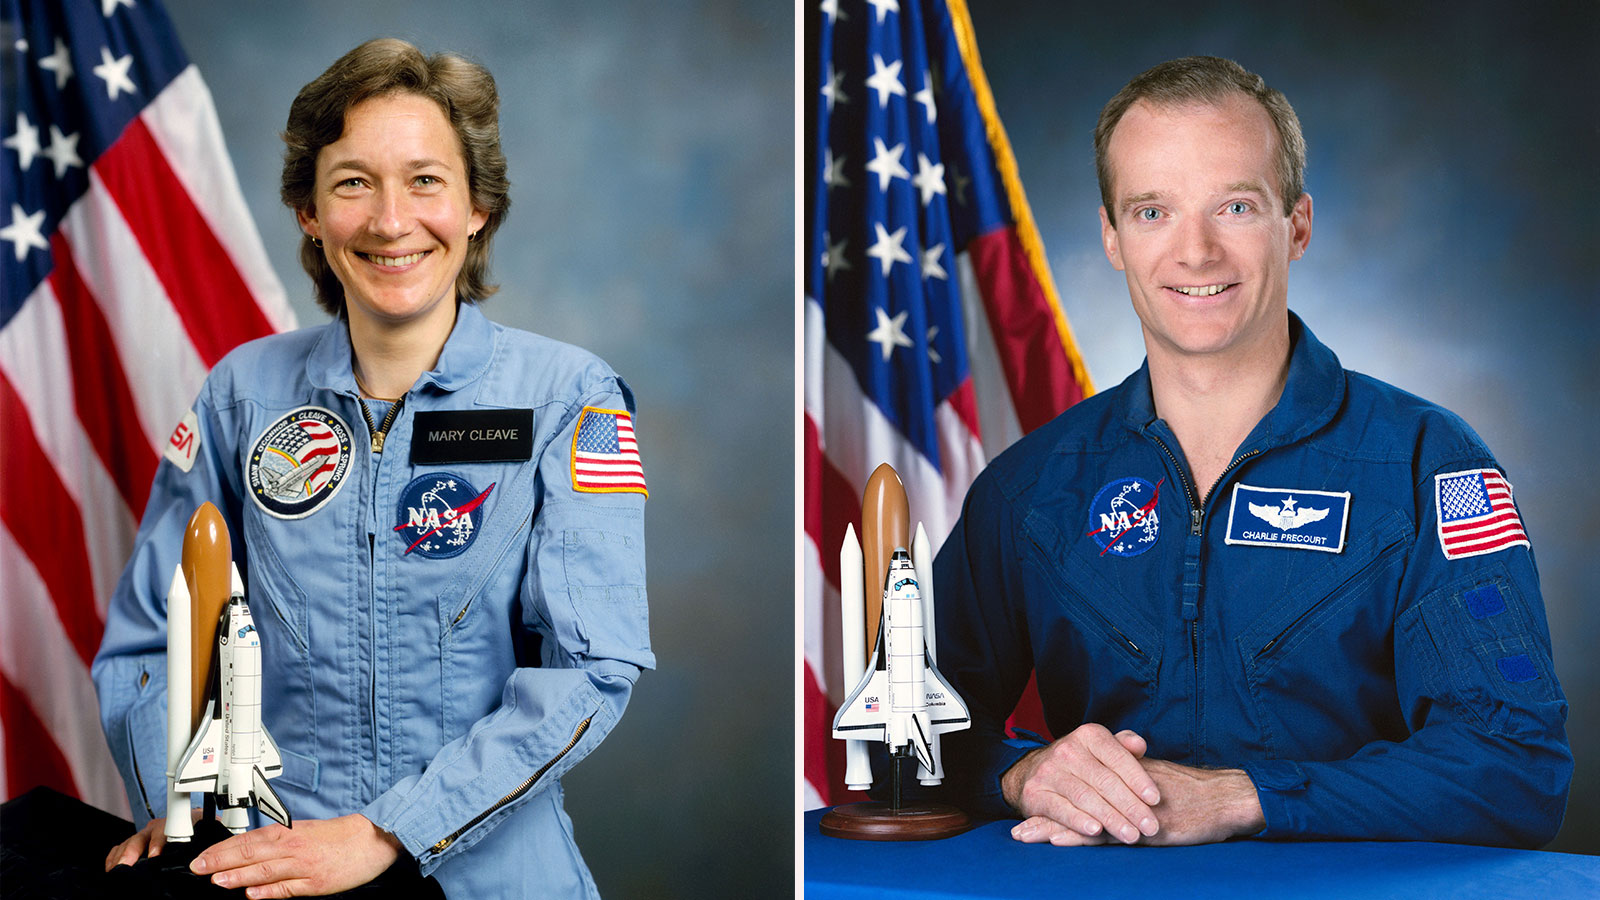 Retired NASA astronauts Mary Cleave and Charles Precourt will be the keynote speakers at a special event to commemorate a new scholarship from the Astronaut Scholarship Foundation.